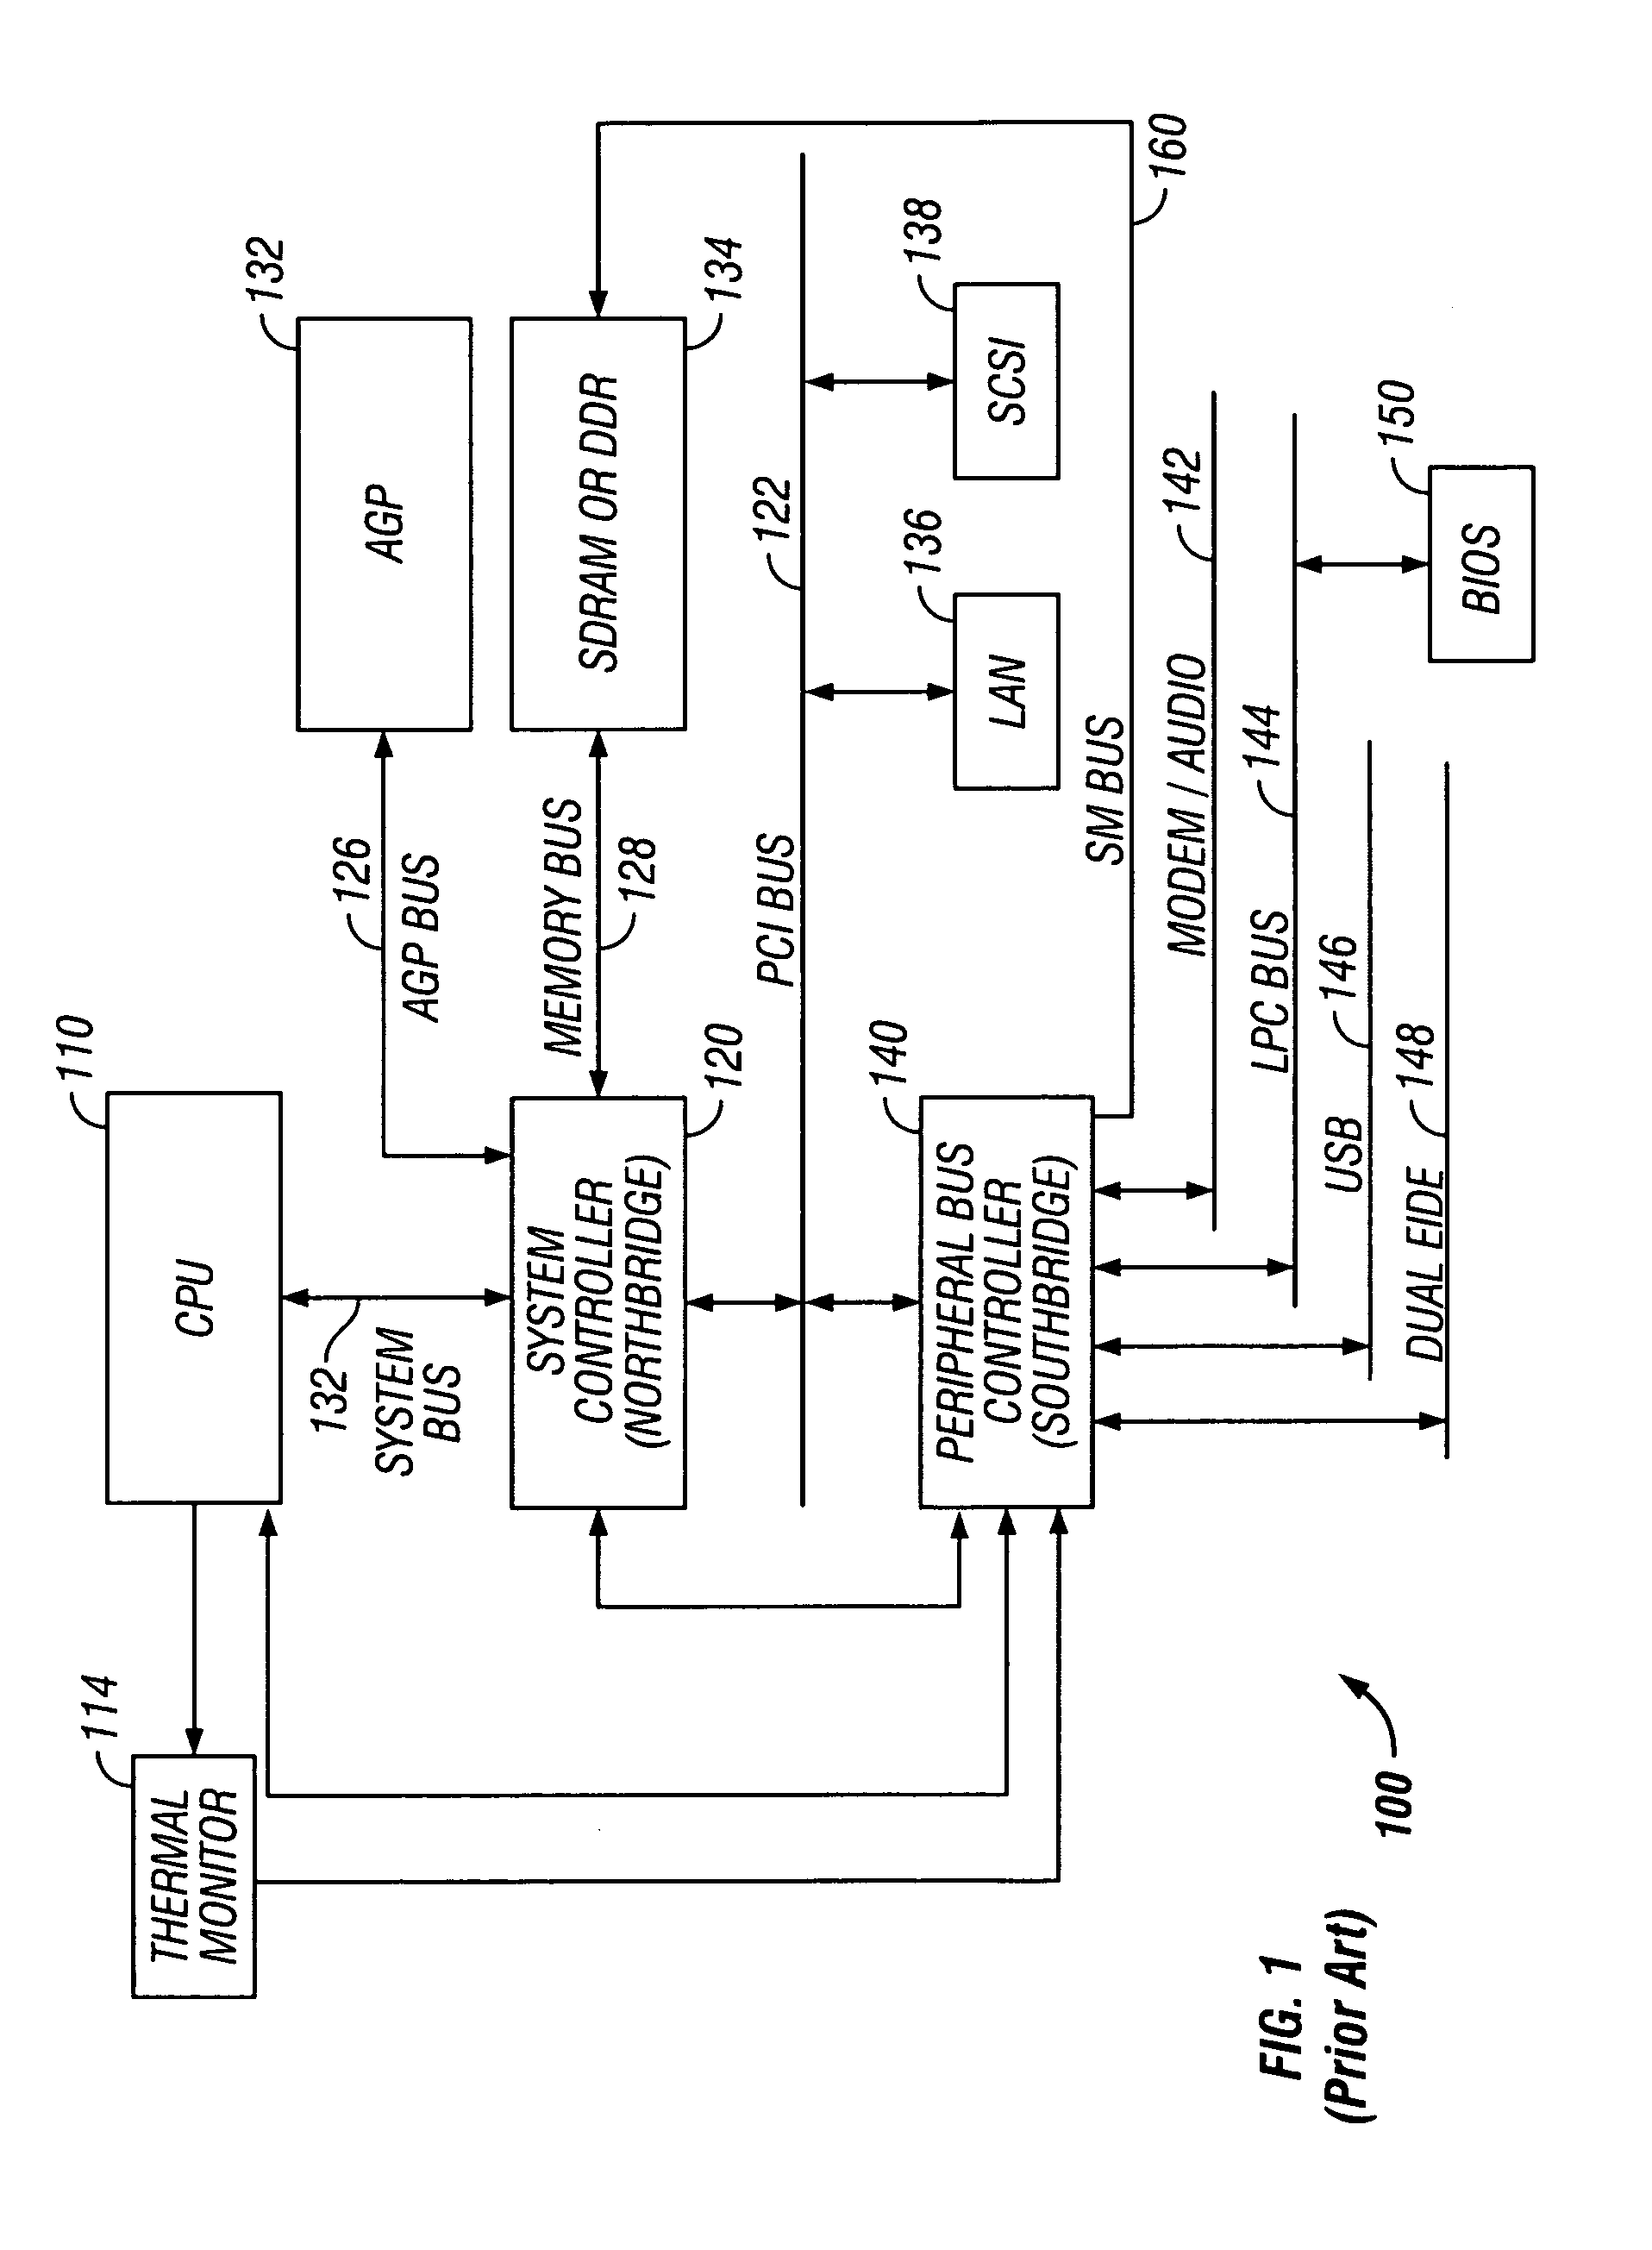 Memory check architecture and method for a multiprocessor computer system